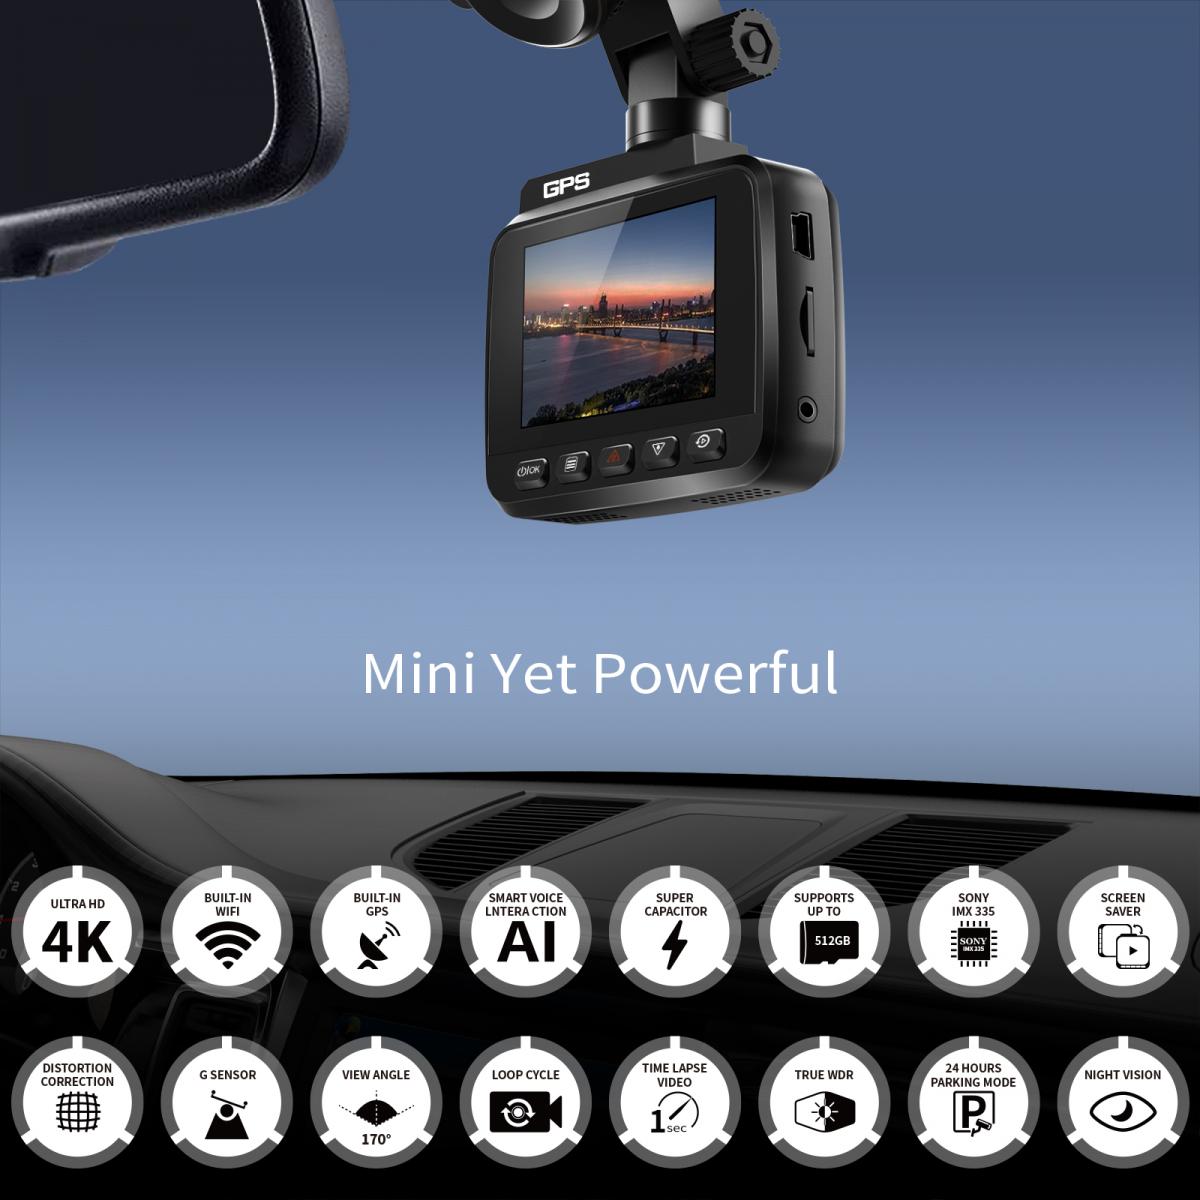 4K HD Car Recorder with 170° Recording Angle with G Sensor GPS WiFi